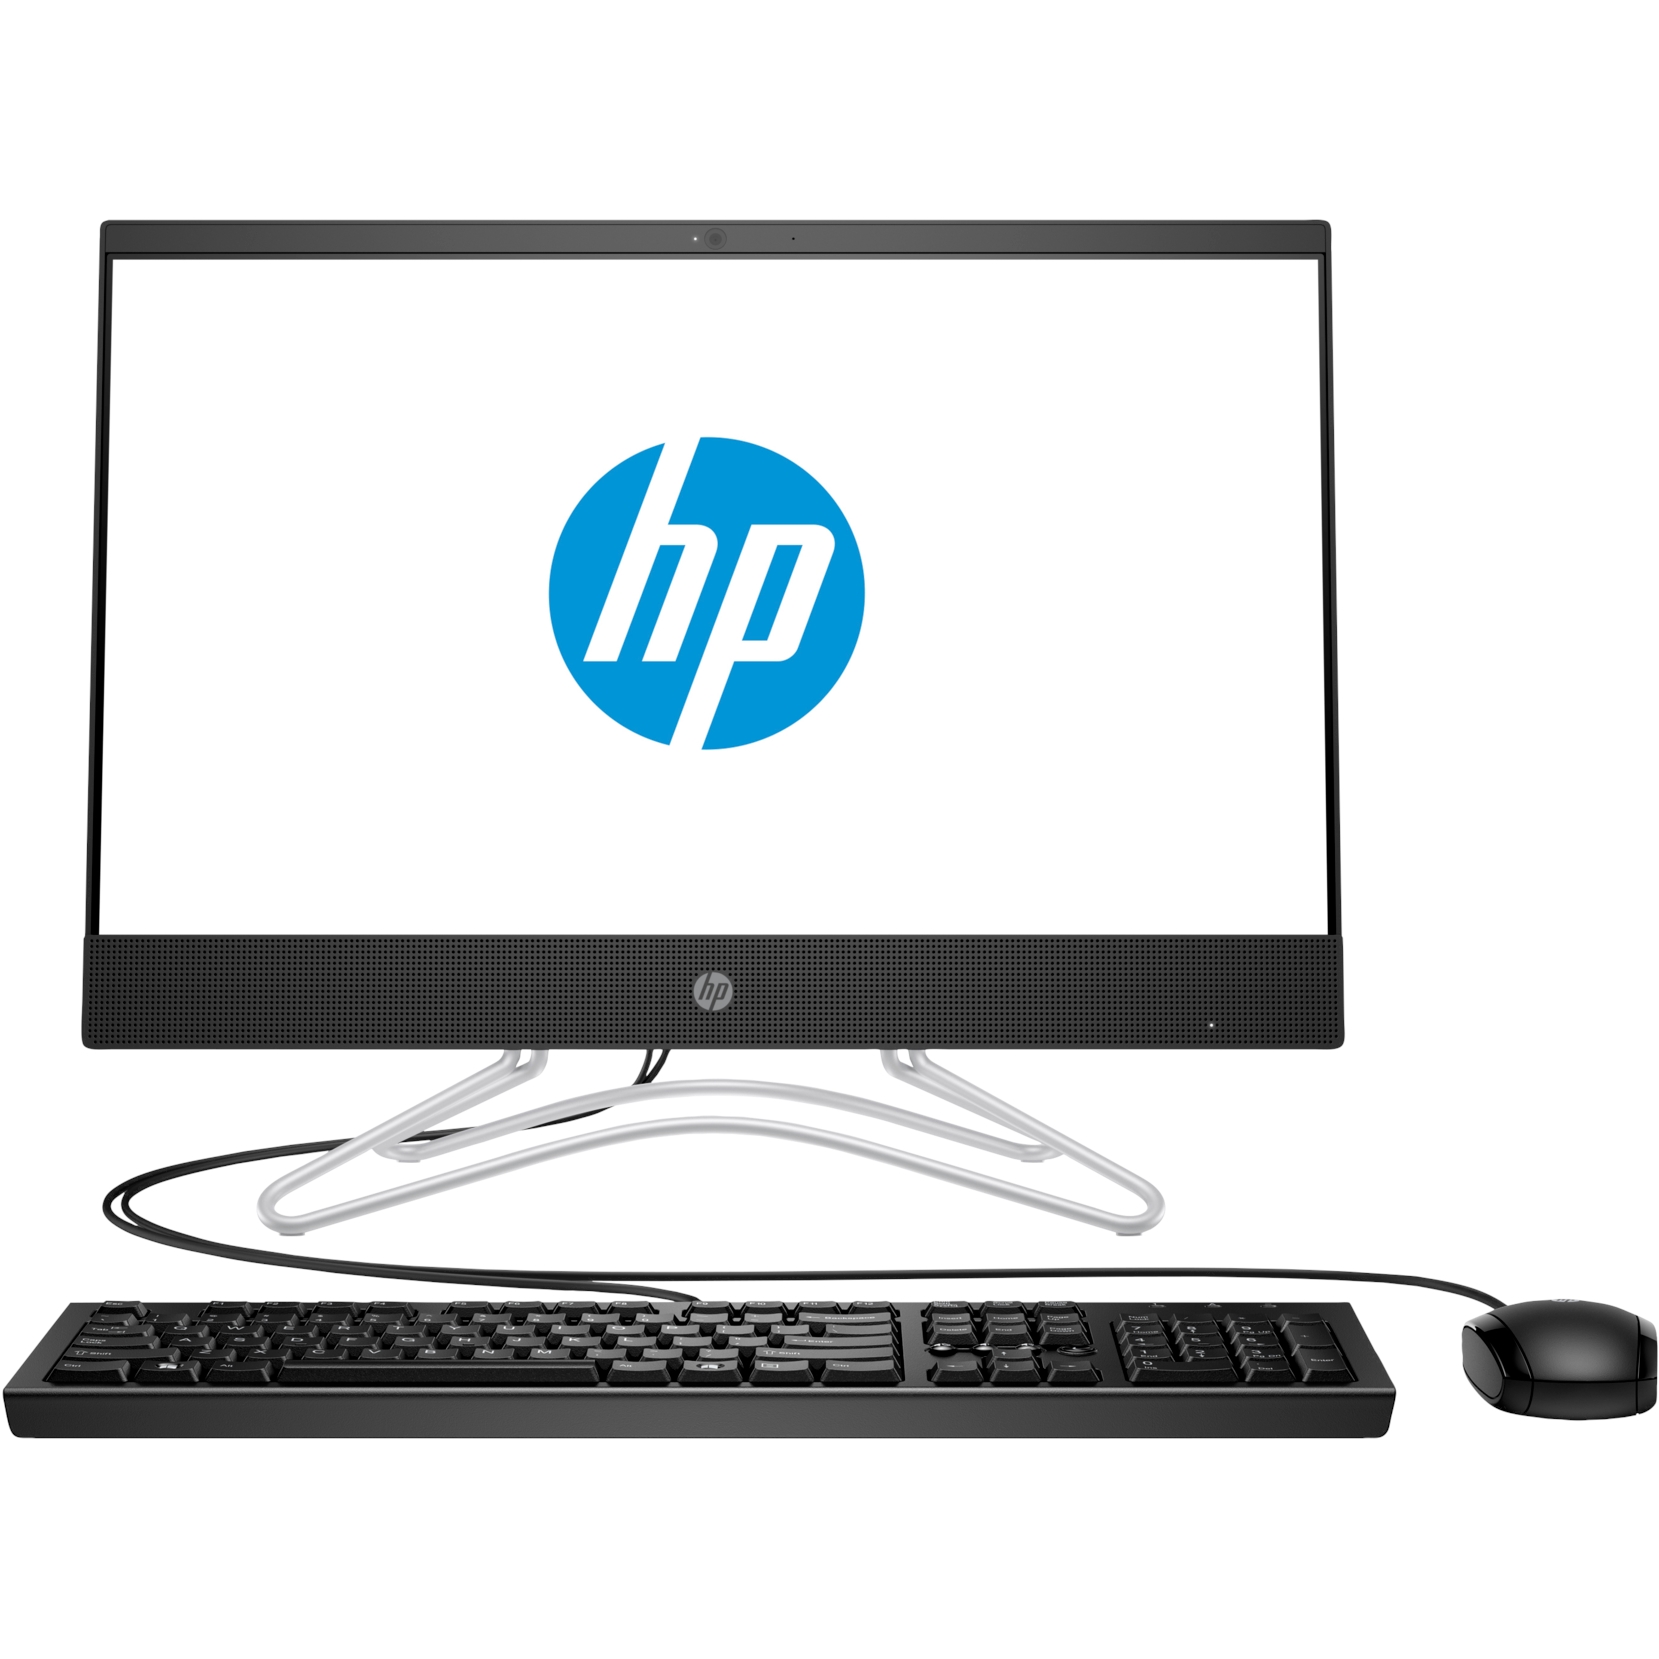 HP 22-C0082NT 9EV81EA I5-9400T 8GB 128GB SSD/2TB 2GB NVIDIA MX110 21.5" FHD FREEDOS ALL IN ONE PC